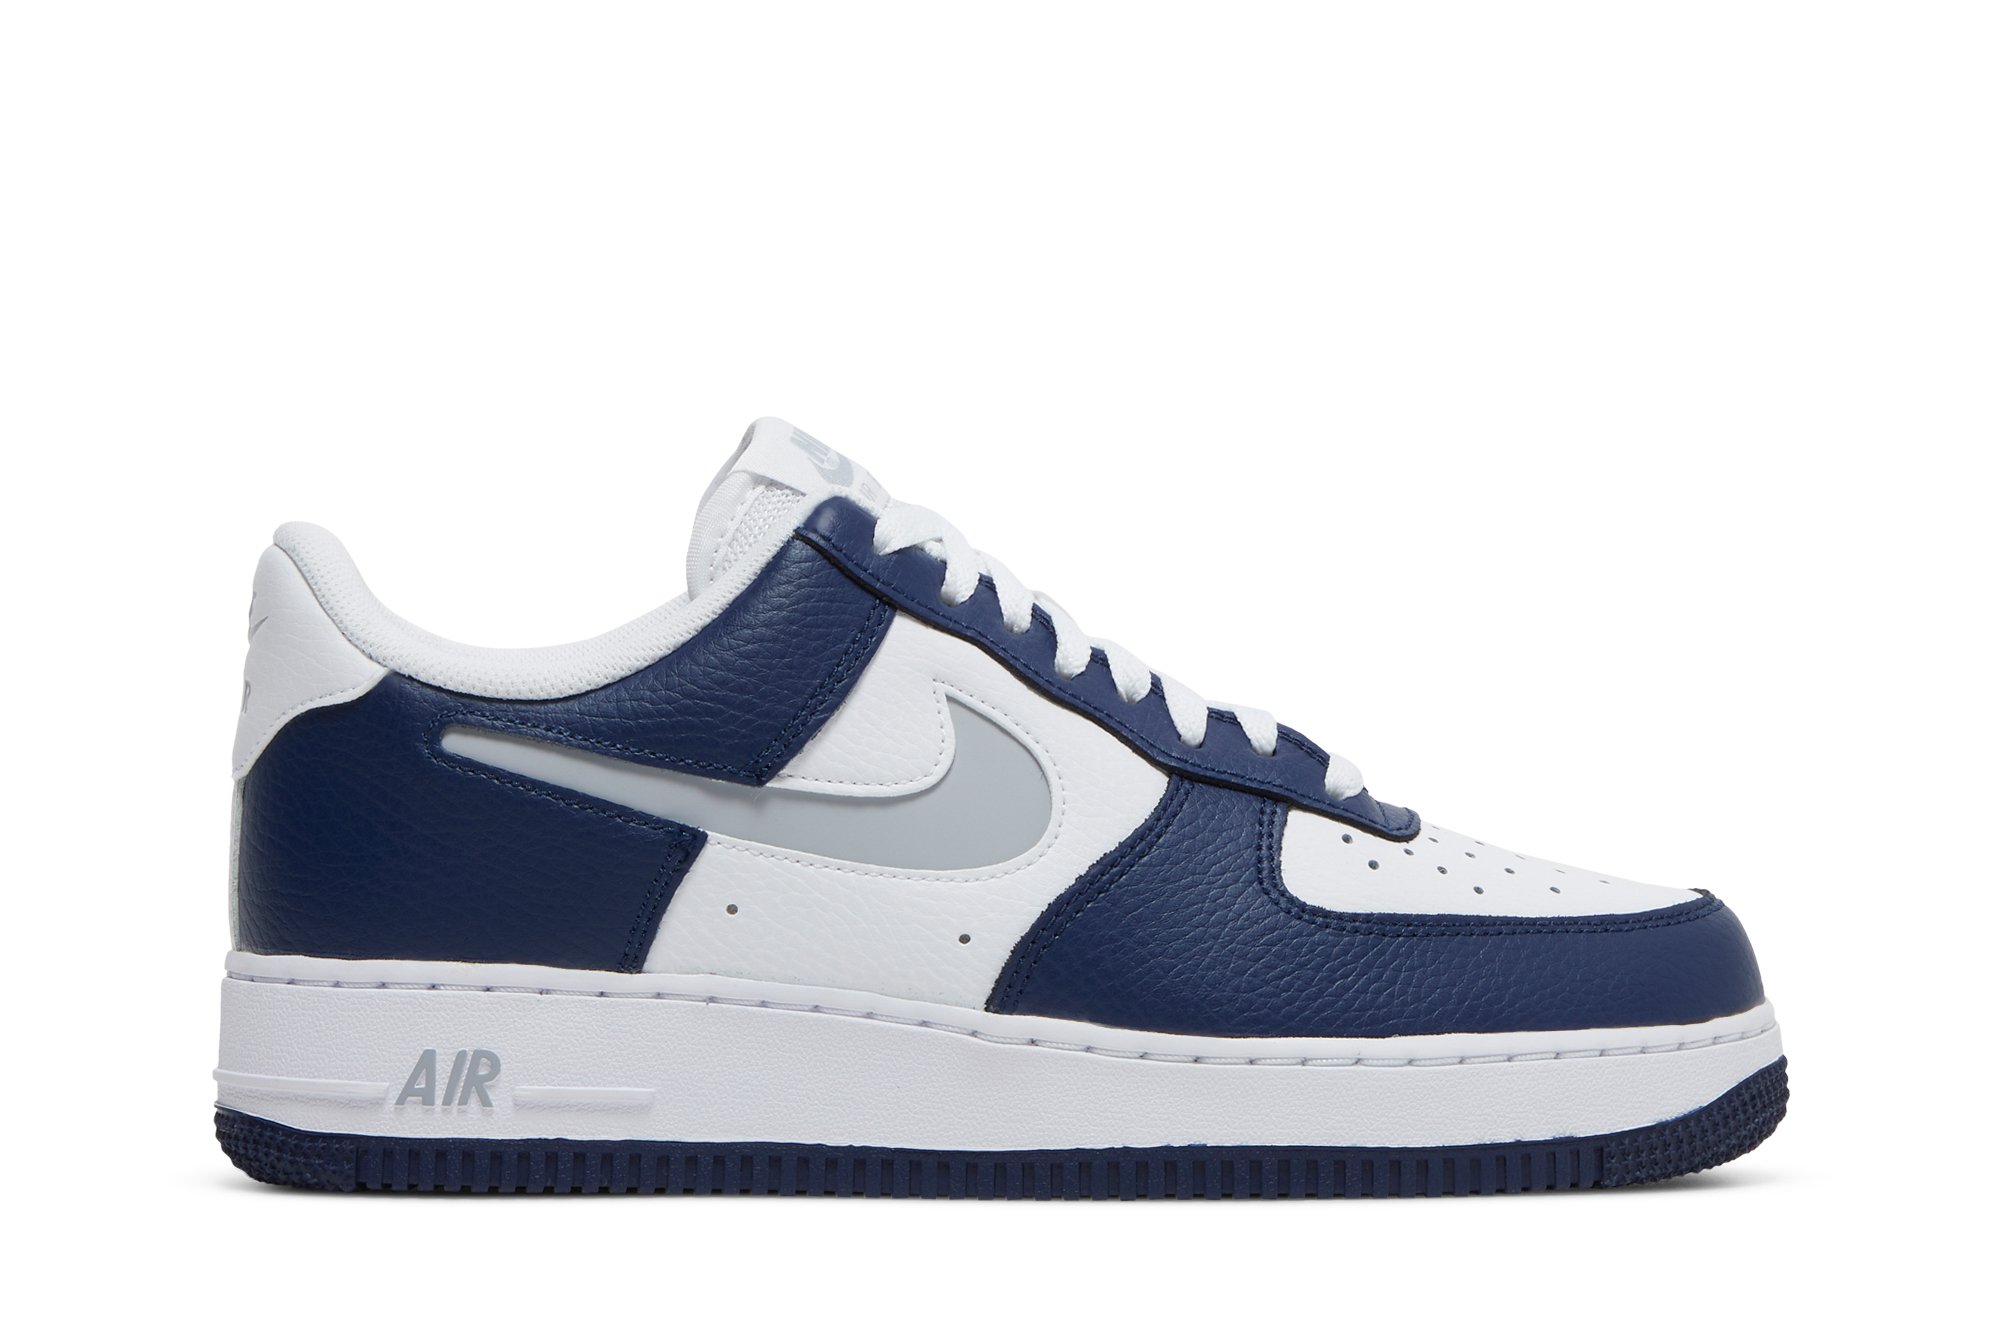 Air Force 1 '07 LV8 'Midnight Navy' | GOAT